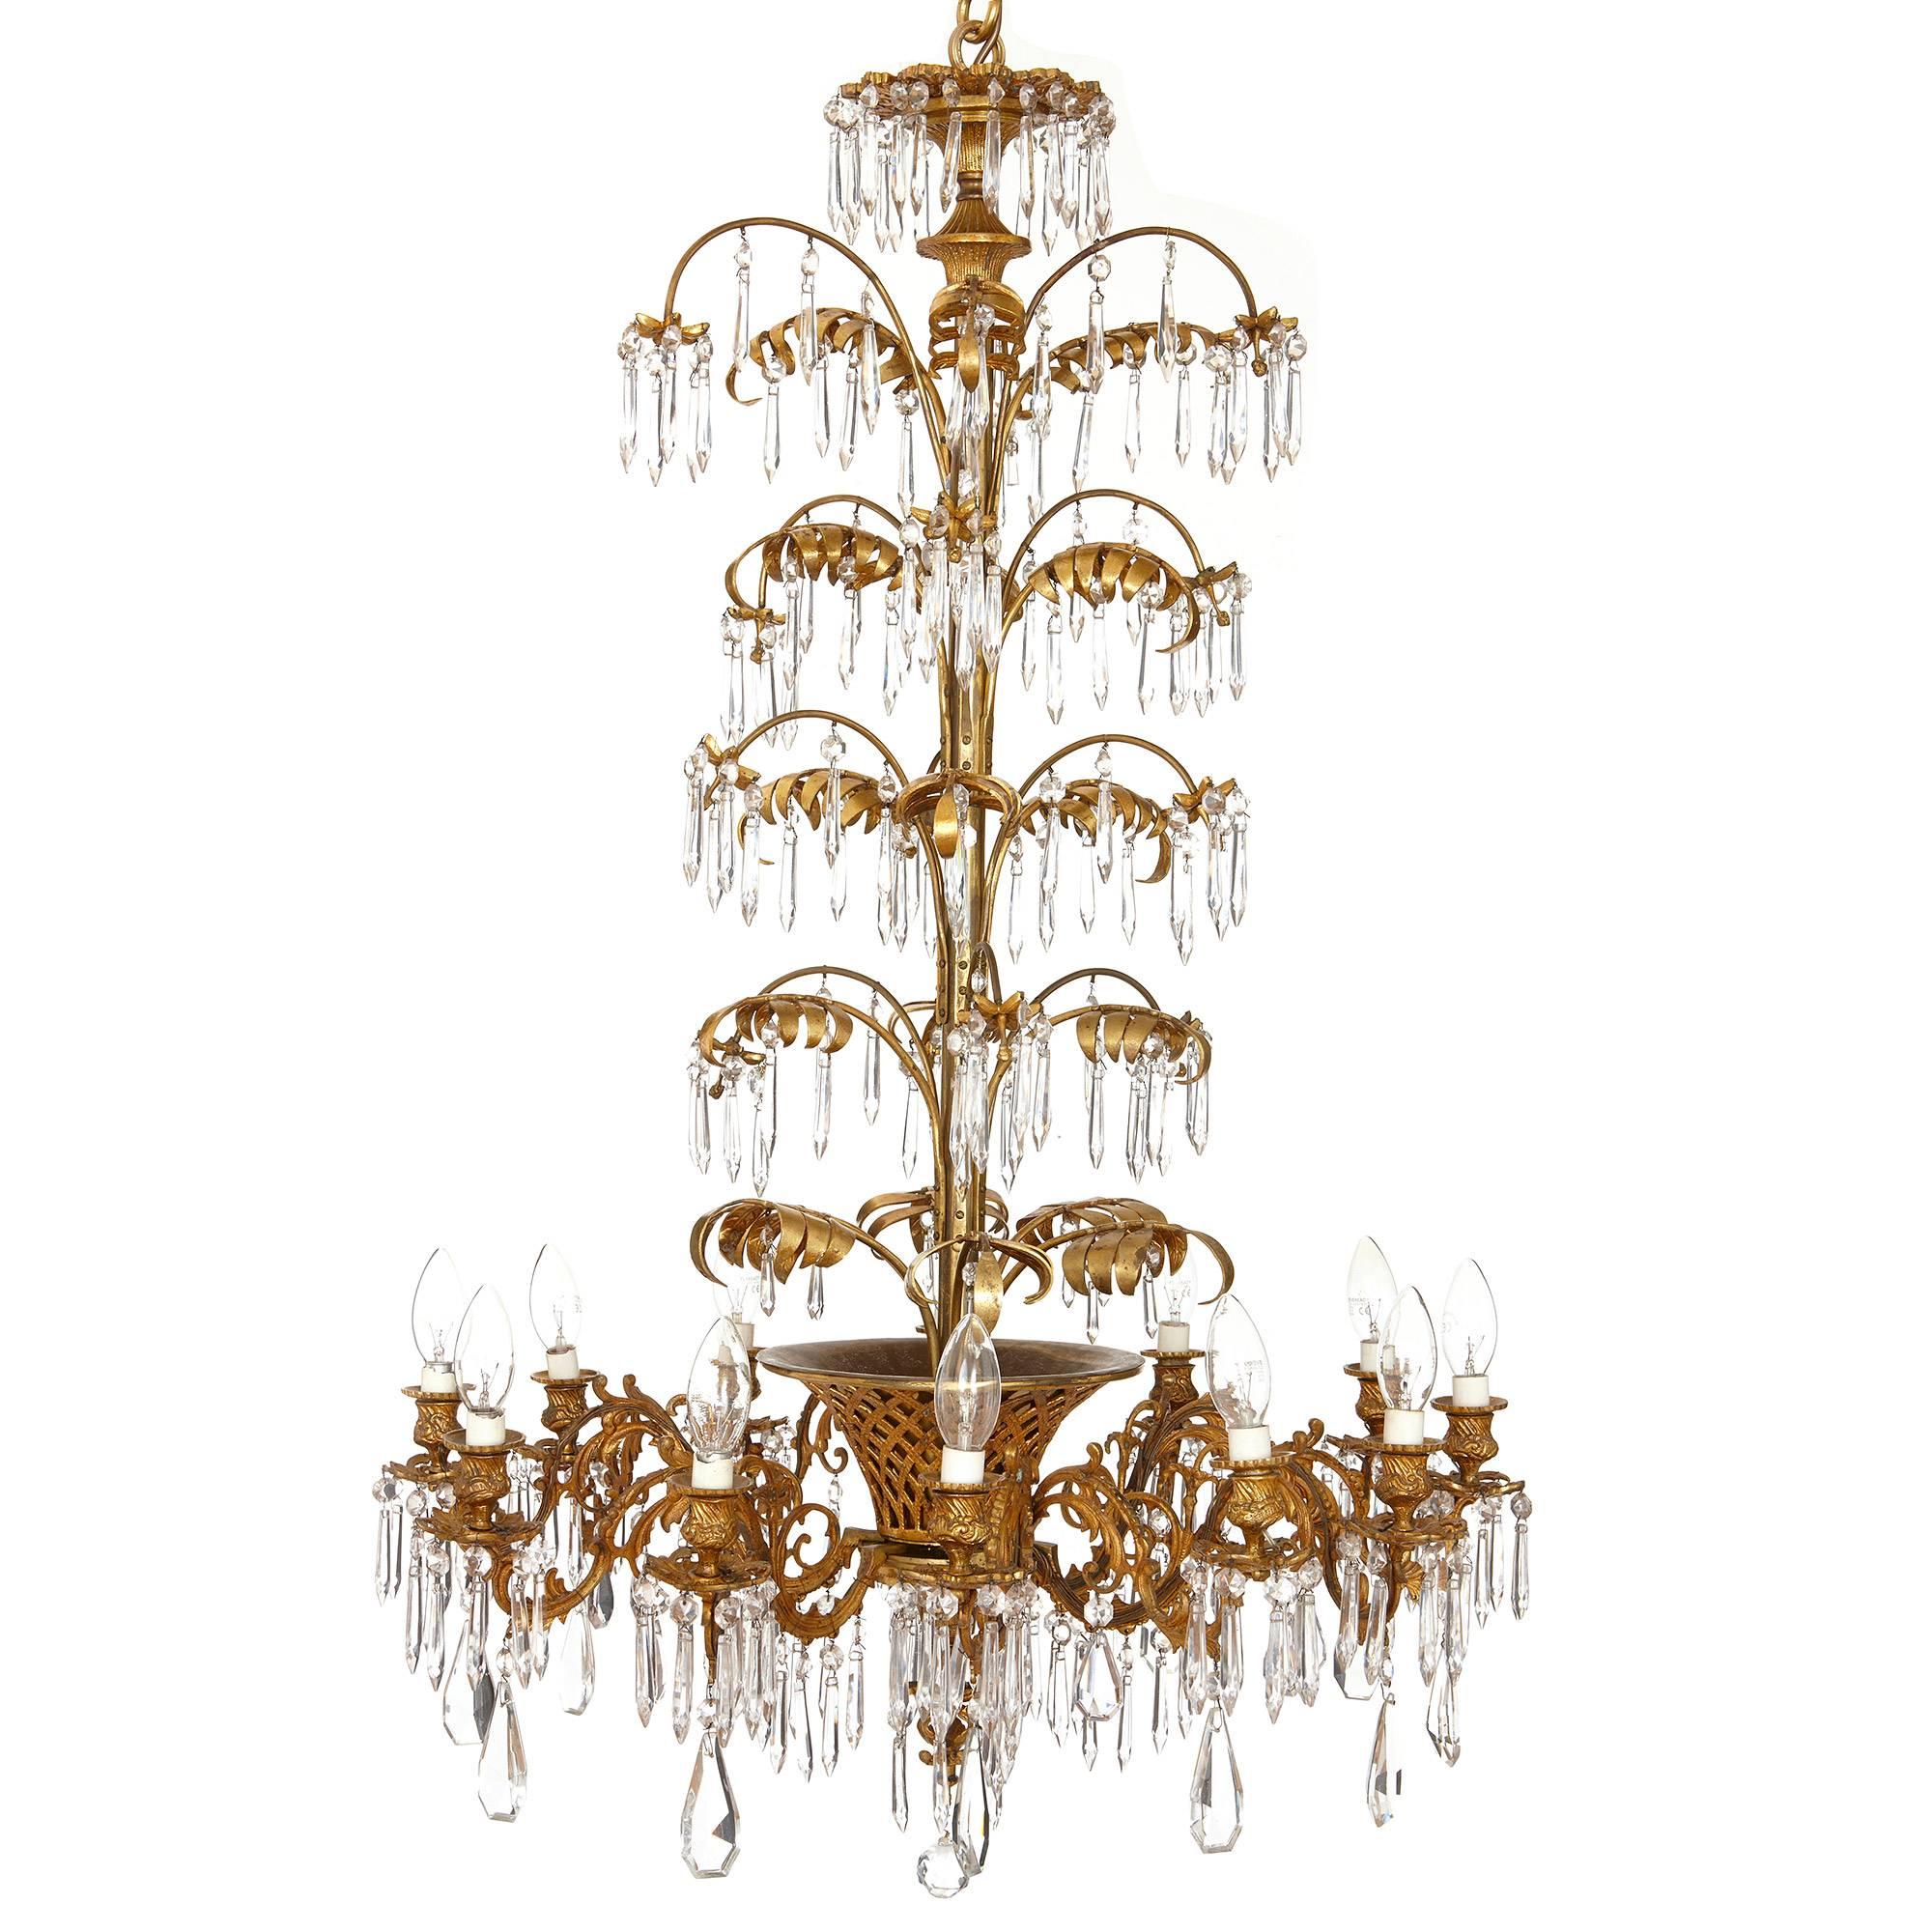 French Antique Belle Epoque Style Ormolu and Cut-Glass Twelve-Light Chandelier For Sale